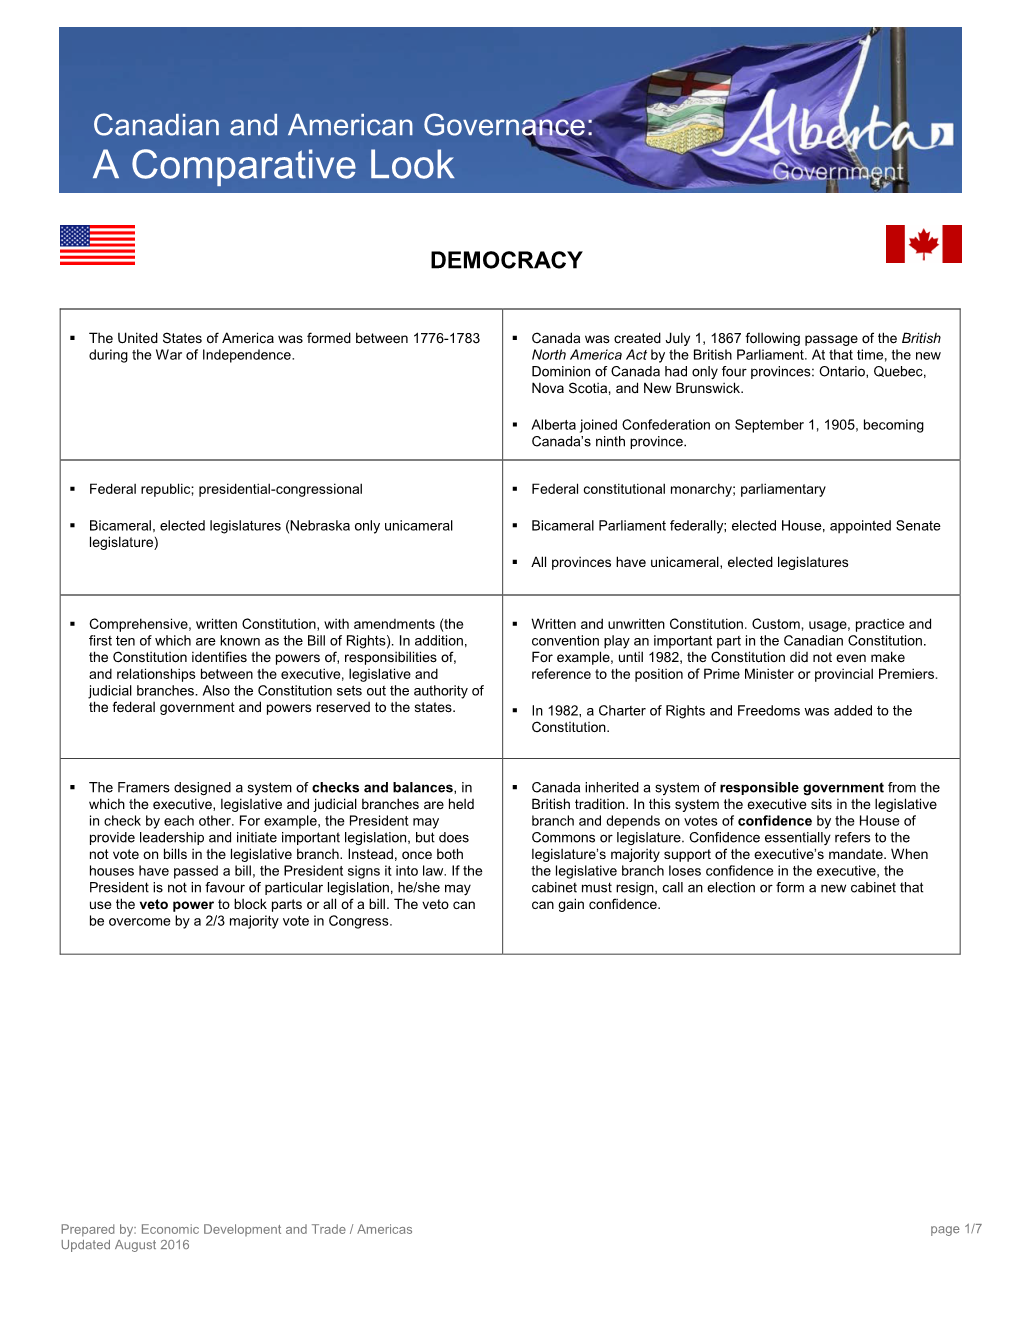 Canadian and American Governance : a Comparative Look